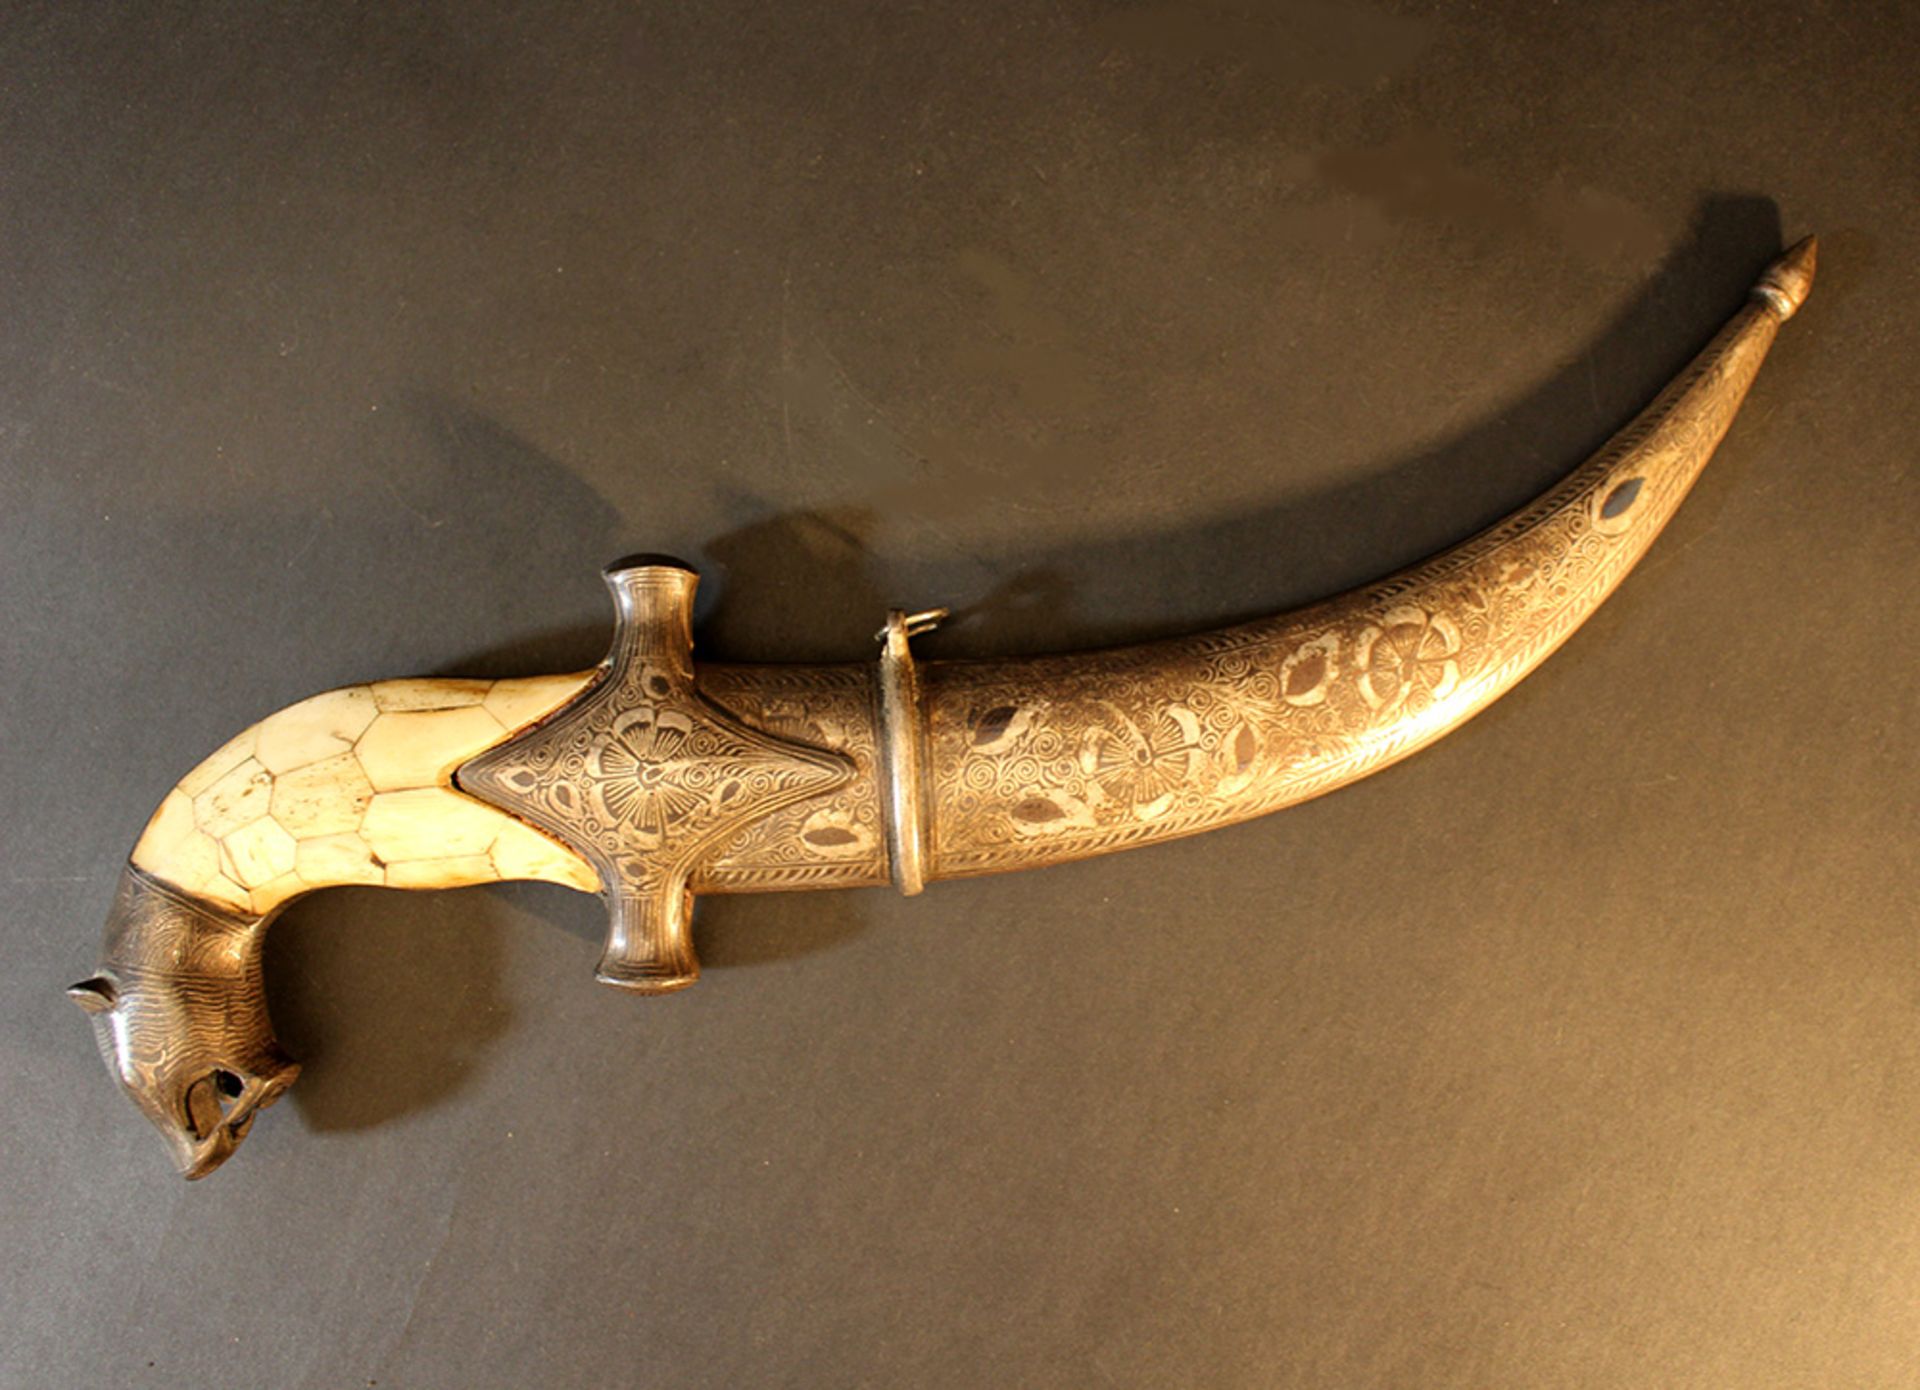 A Persian dagger, in S shape, with lion head grip end, bone grip and richly floral decorated